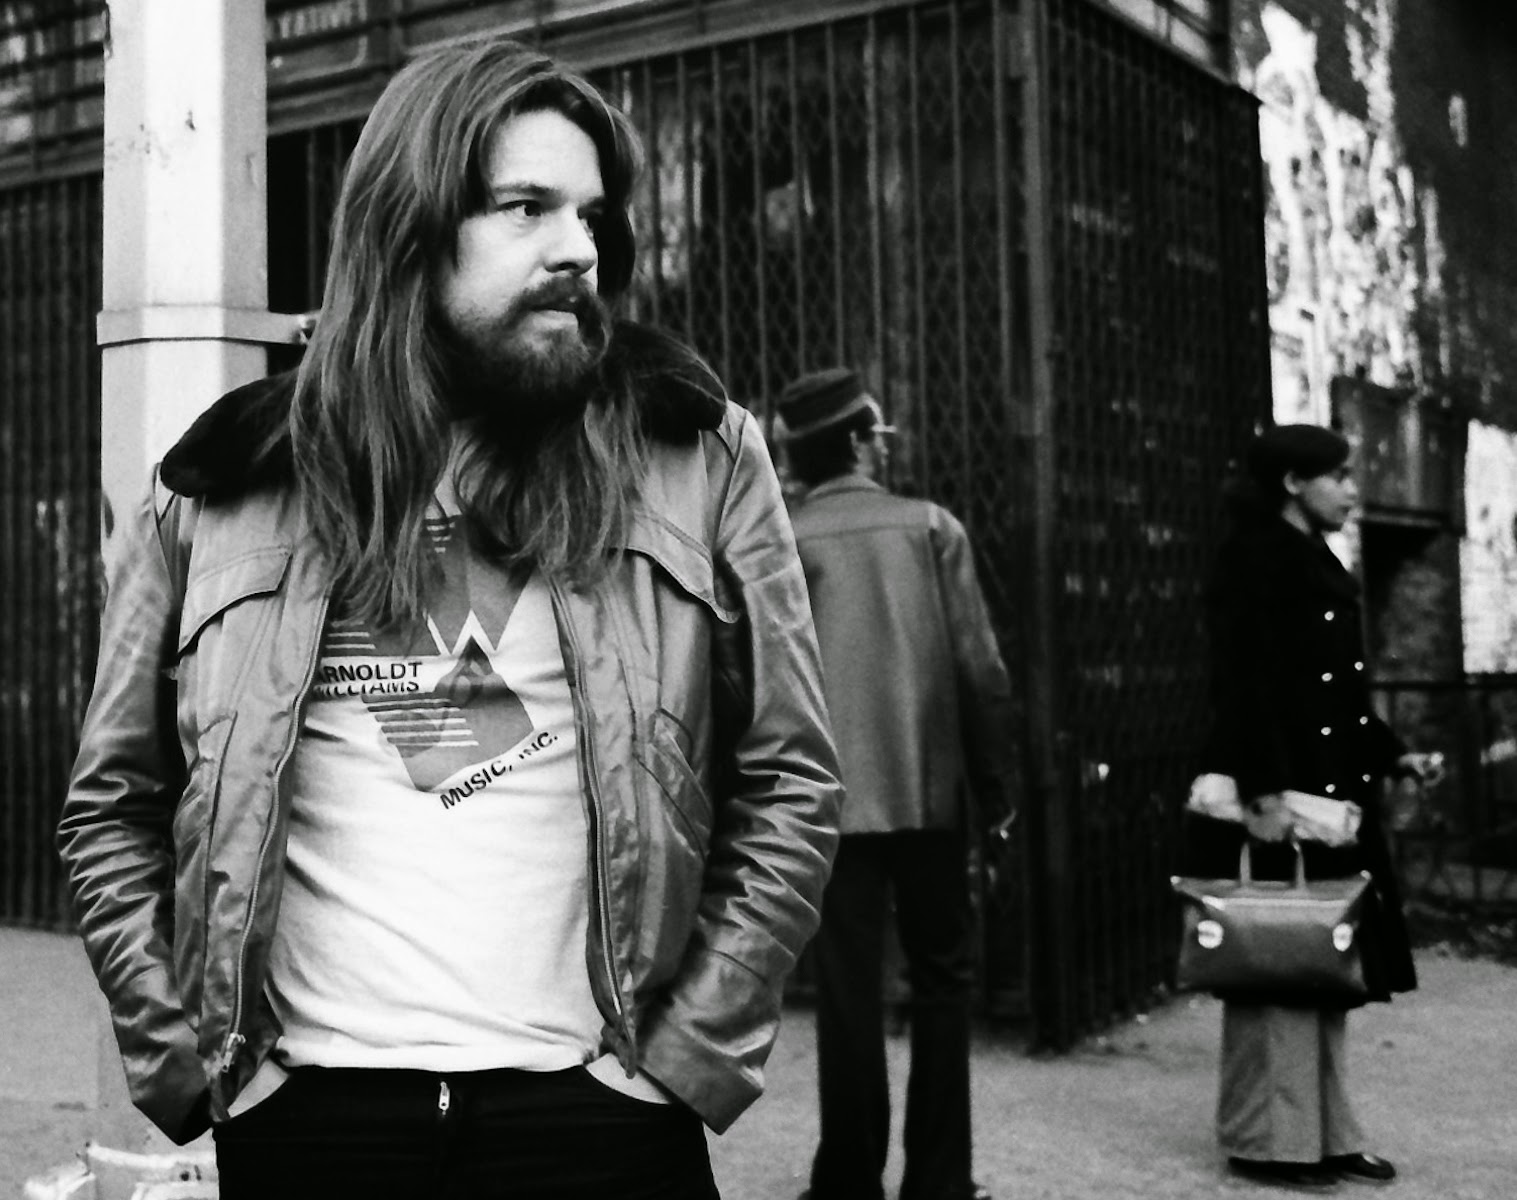 2 or 3 lines (and so much more) Bob Seger "Travelin' Man" (1976)